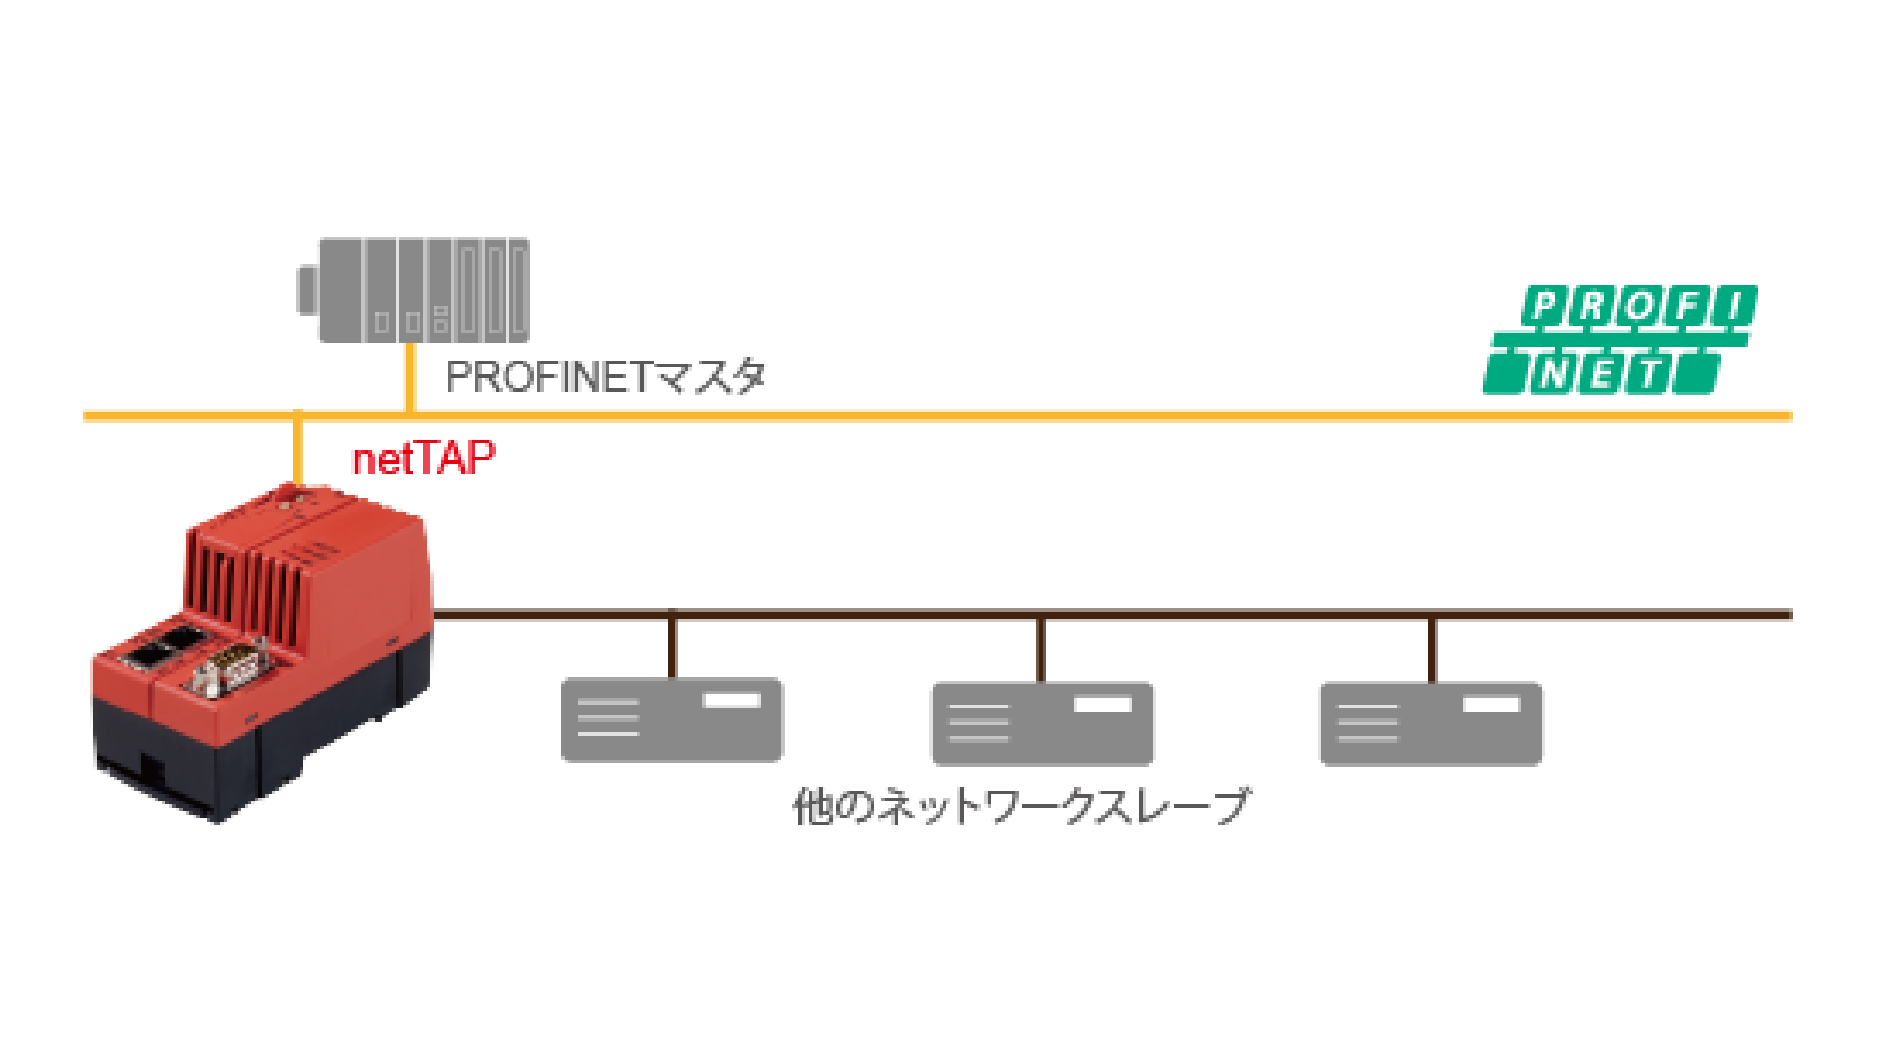 A yellow network line on top with a PROFINET logo. Under the yellow line are three device icons in grey with a netTAP on the left side. The device are connected to the netTAP, while the netTAP itself is connected to the yellow network line.